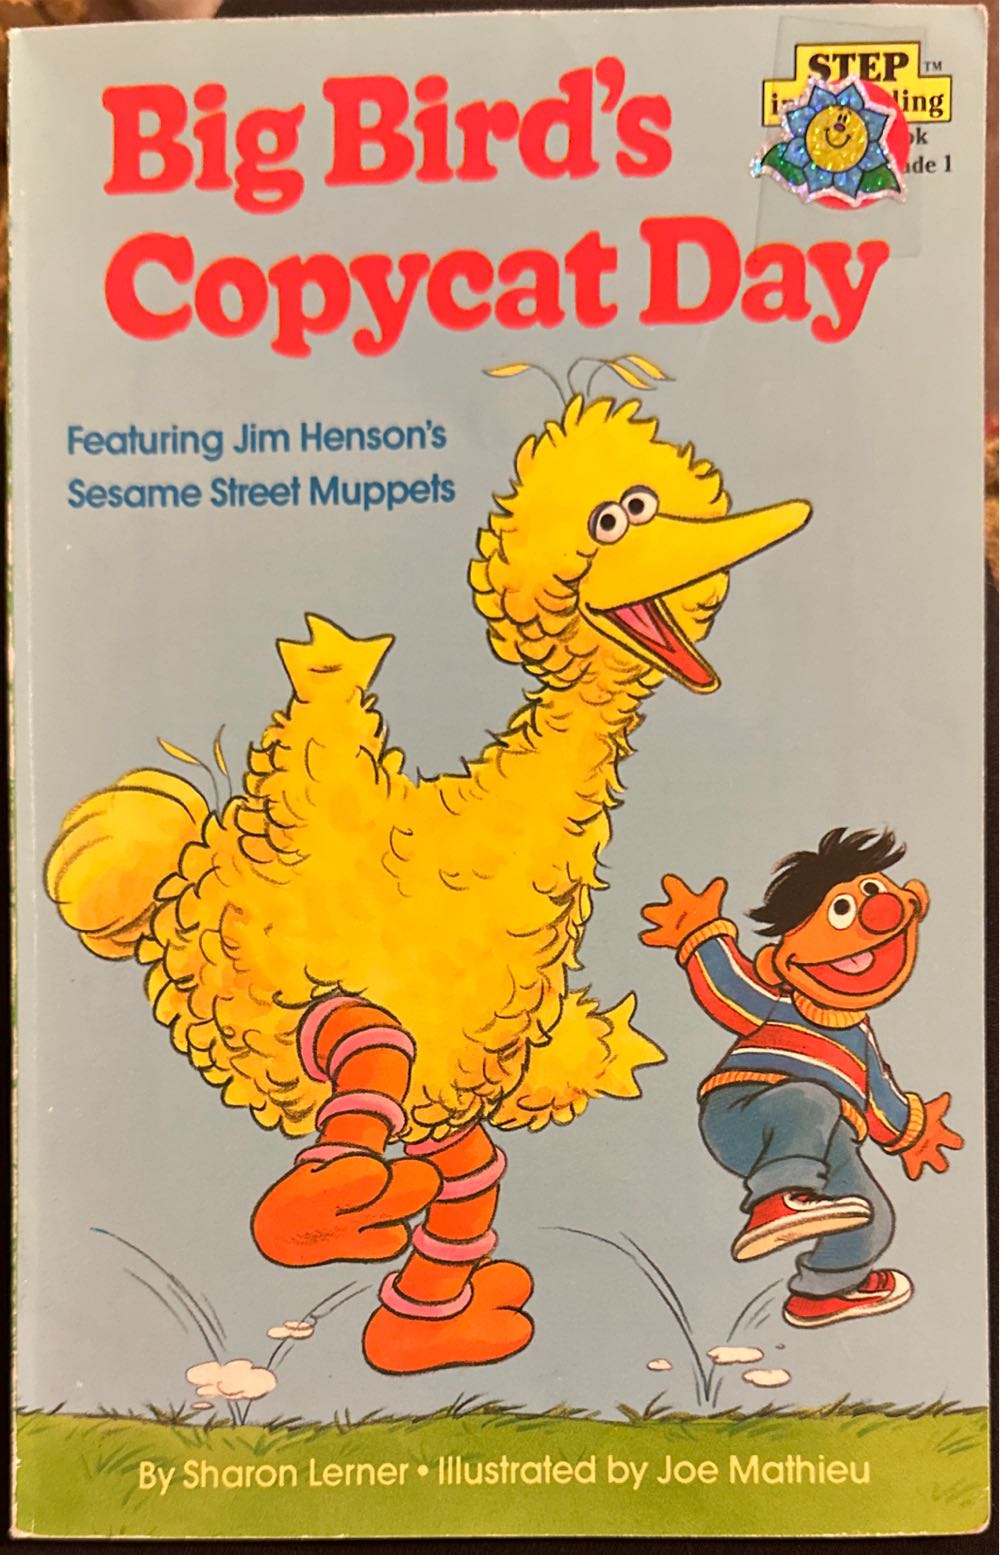 Big Bird’s Copycat Day - Sharon Lerner (Random House Books for Young Readers - Paperback) book collectible [Barcode 9780394869124] - Main Image 2